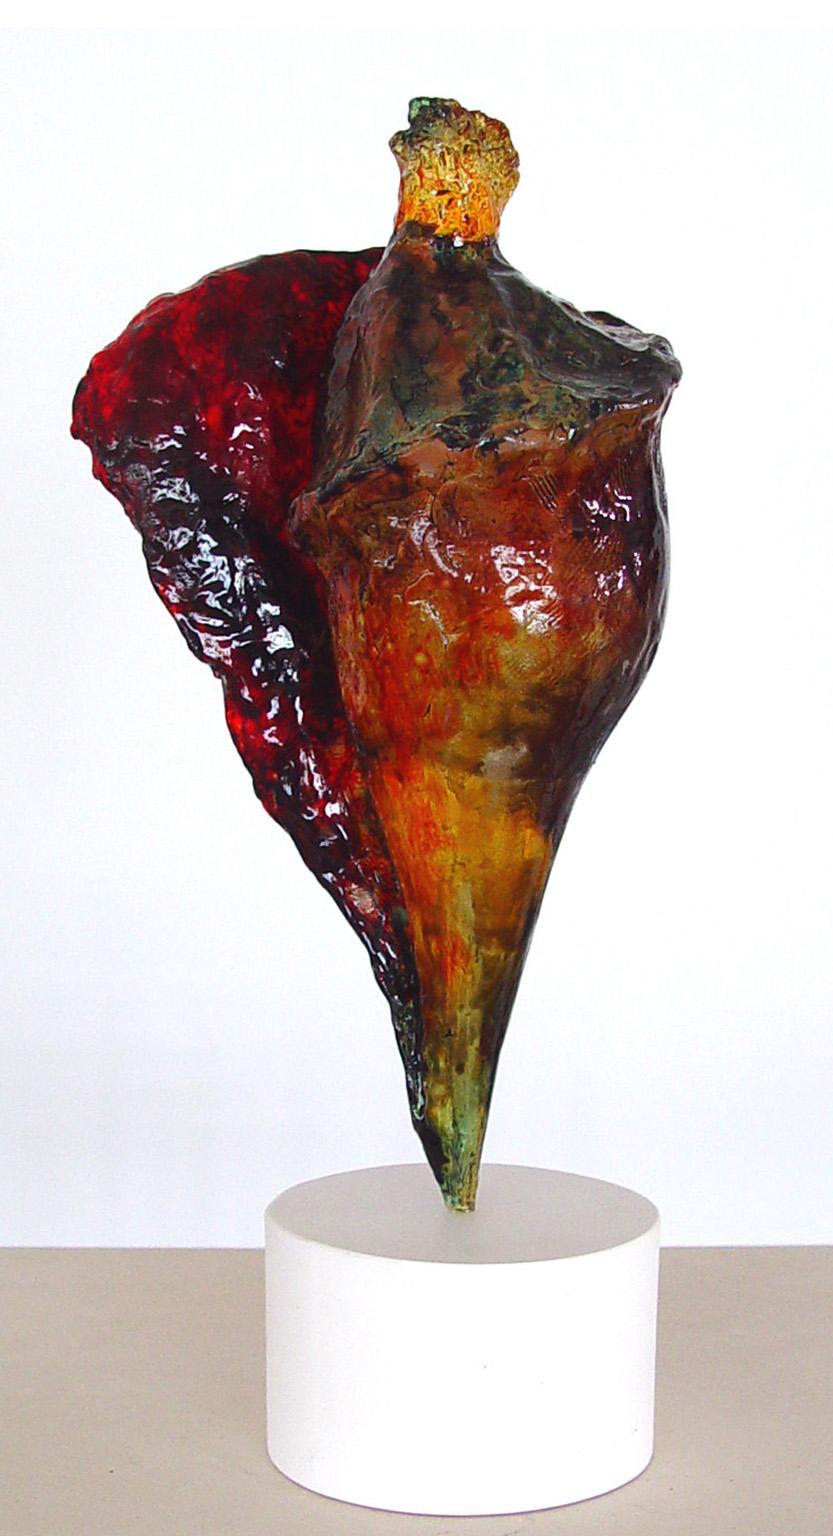 "Shell Dance 4" translucent conch shell form in deep reds pirouettes on a point  - Sculpture by Howard Kalish